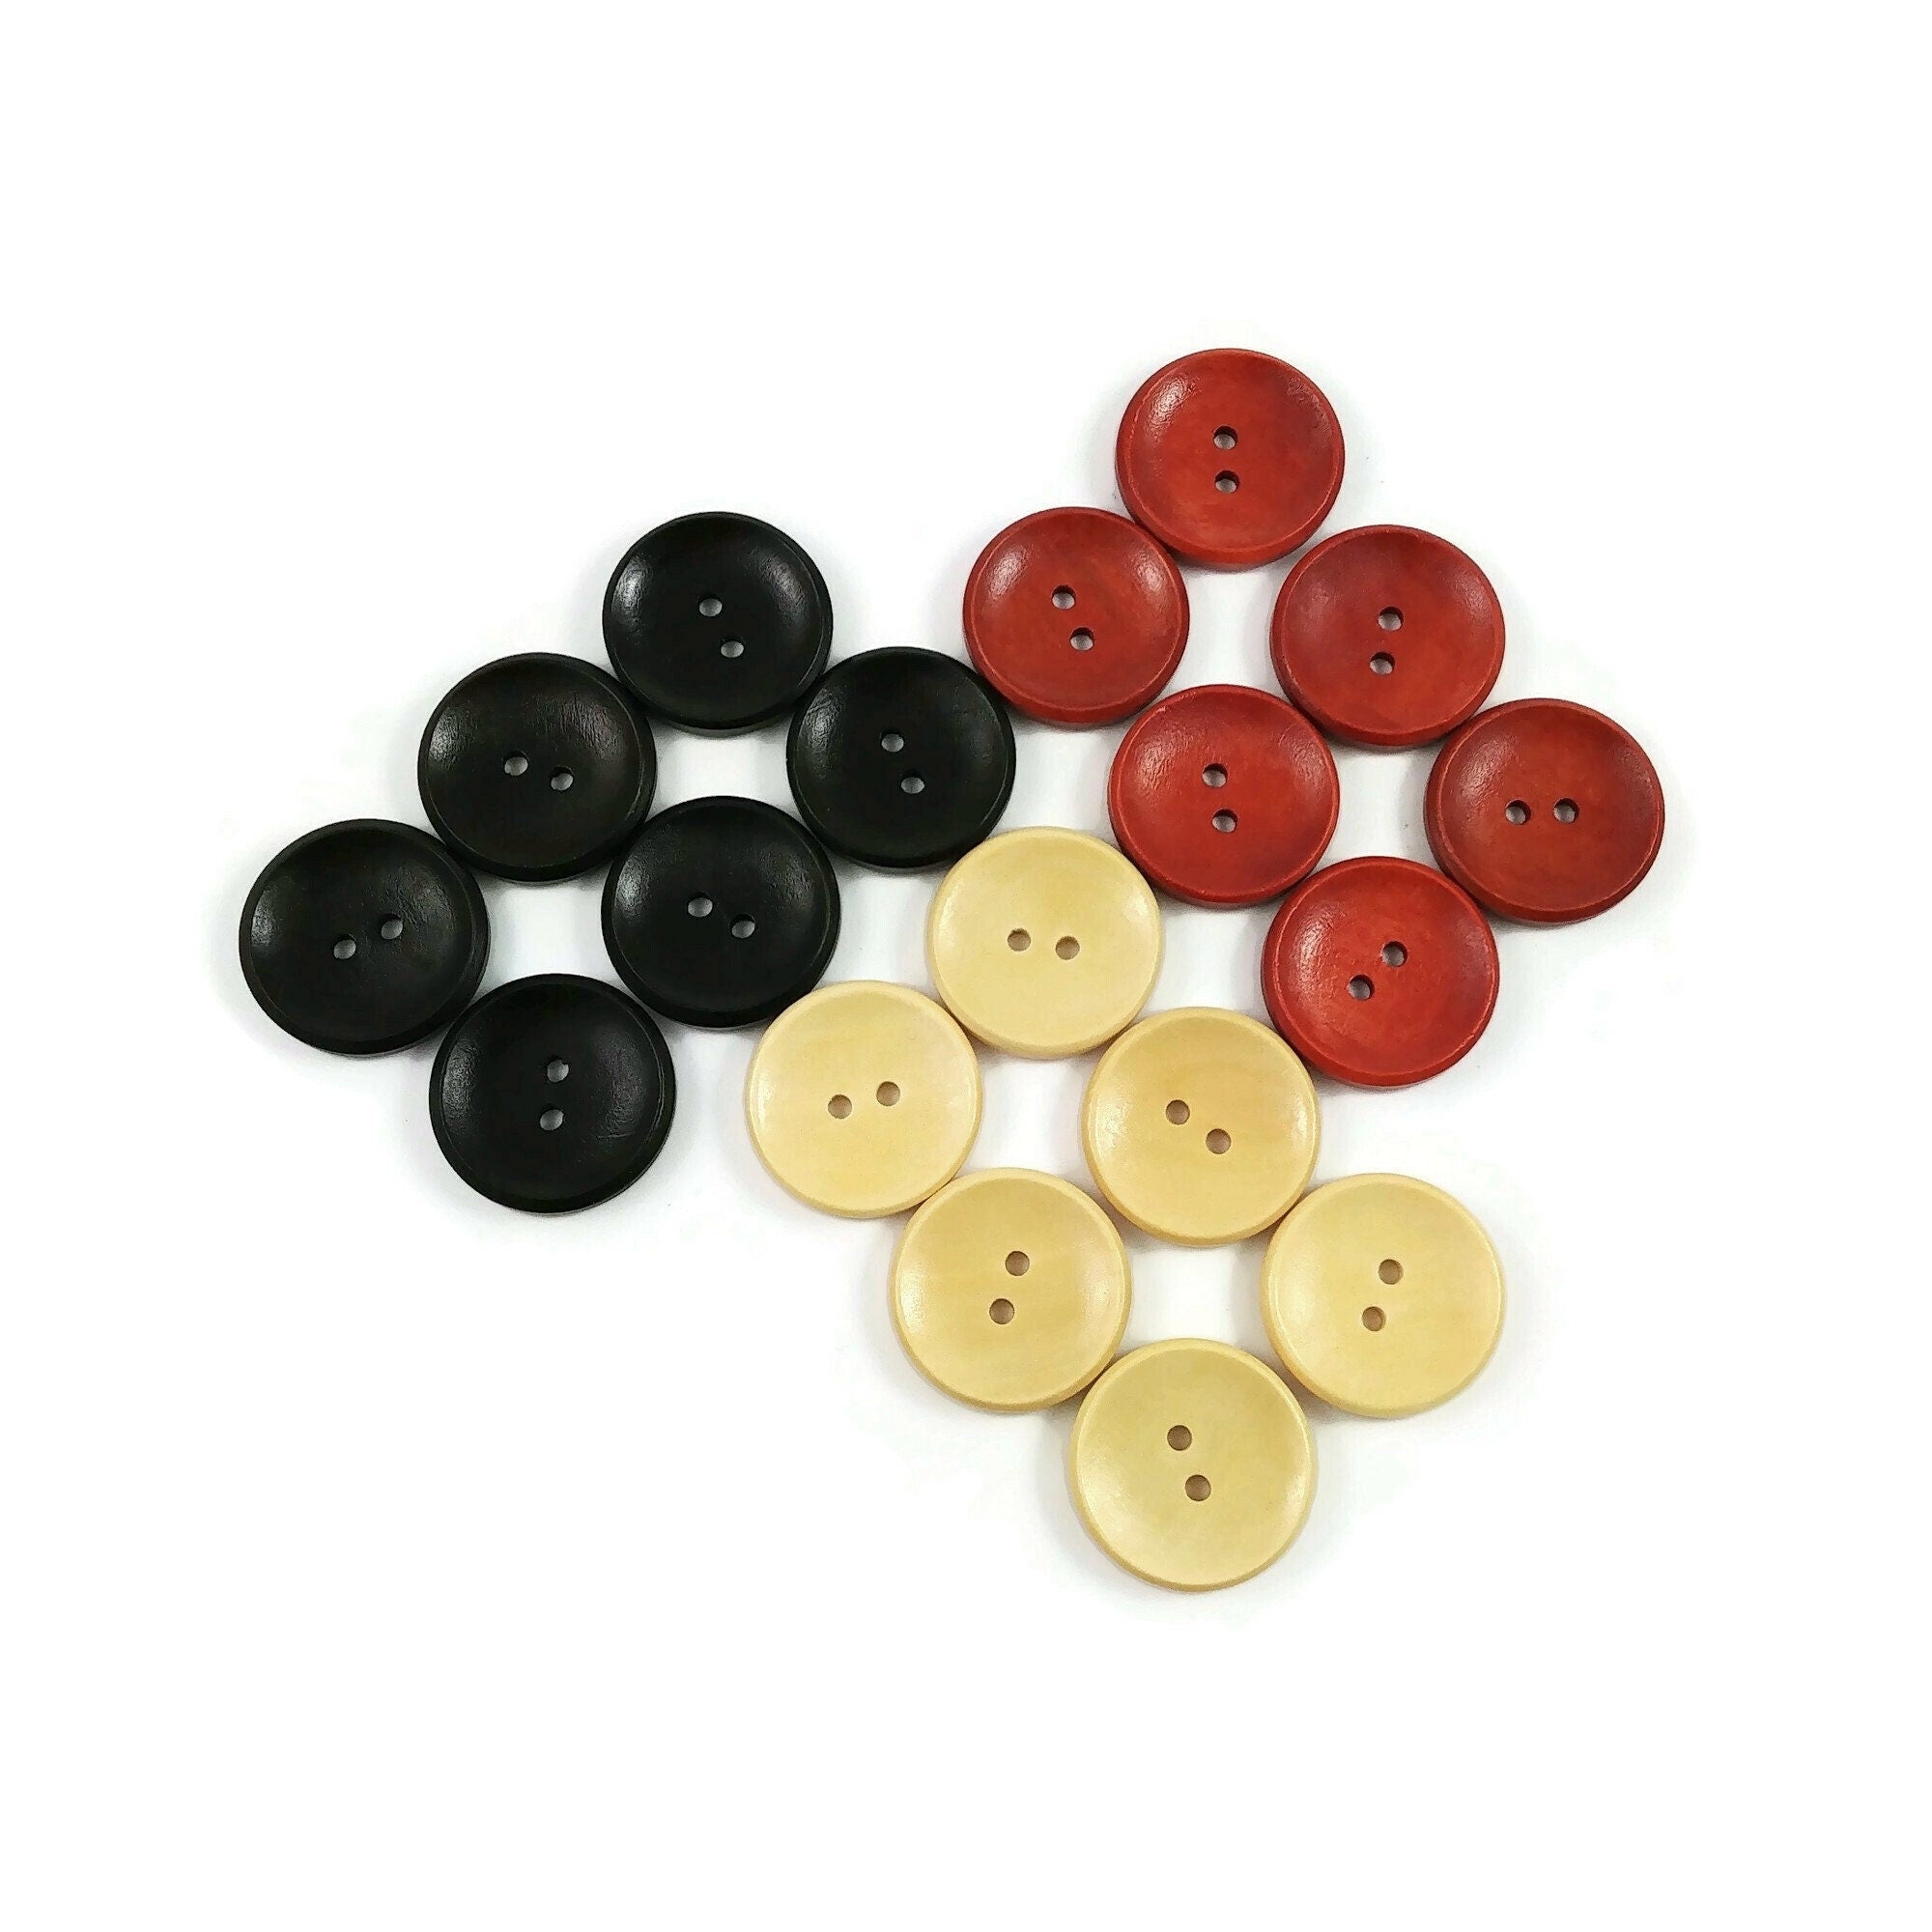 Naierhg 100Pcs Buttons Heart Shape Unfading Wood Brown Sewing Buttons for  Sewing 